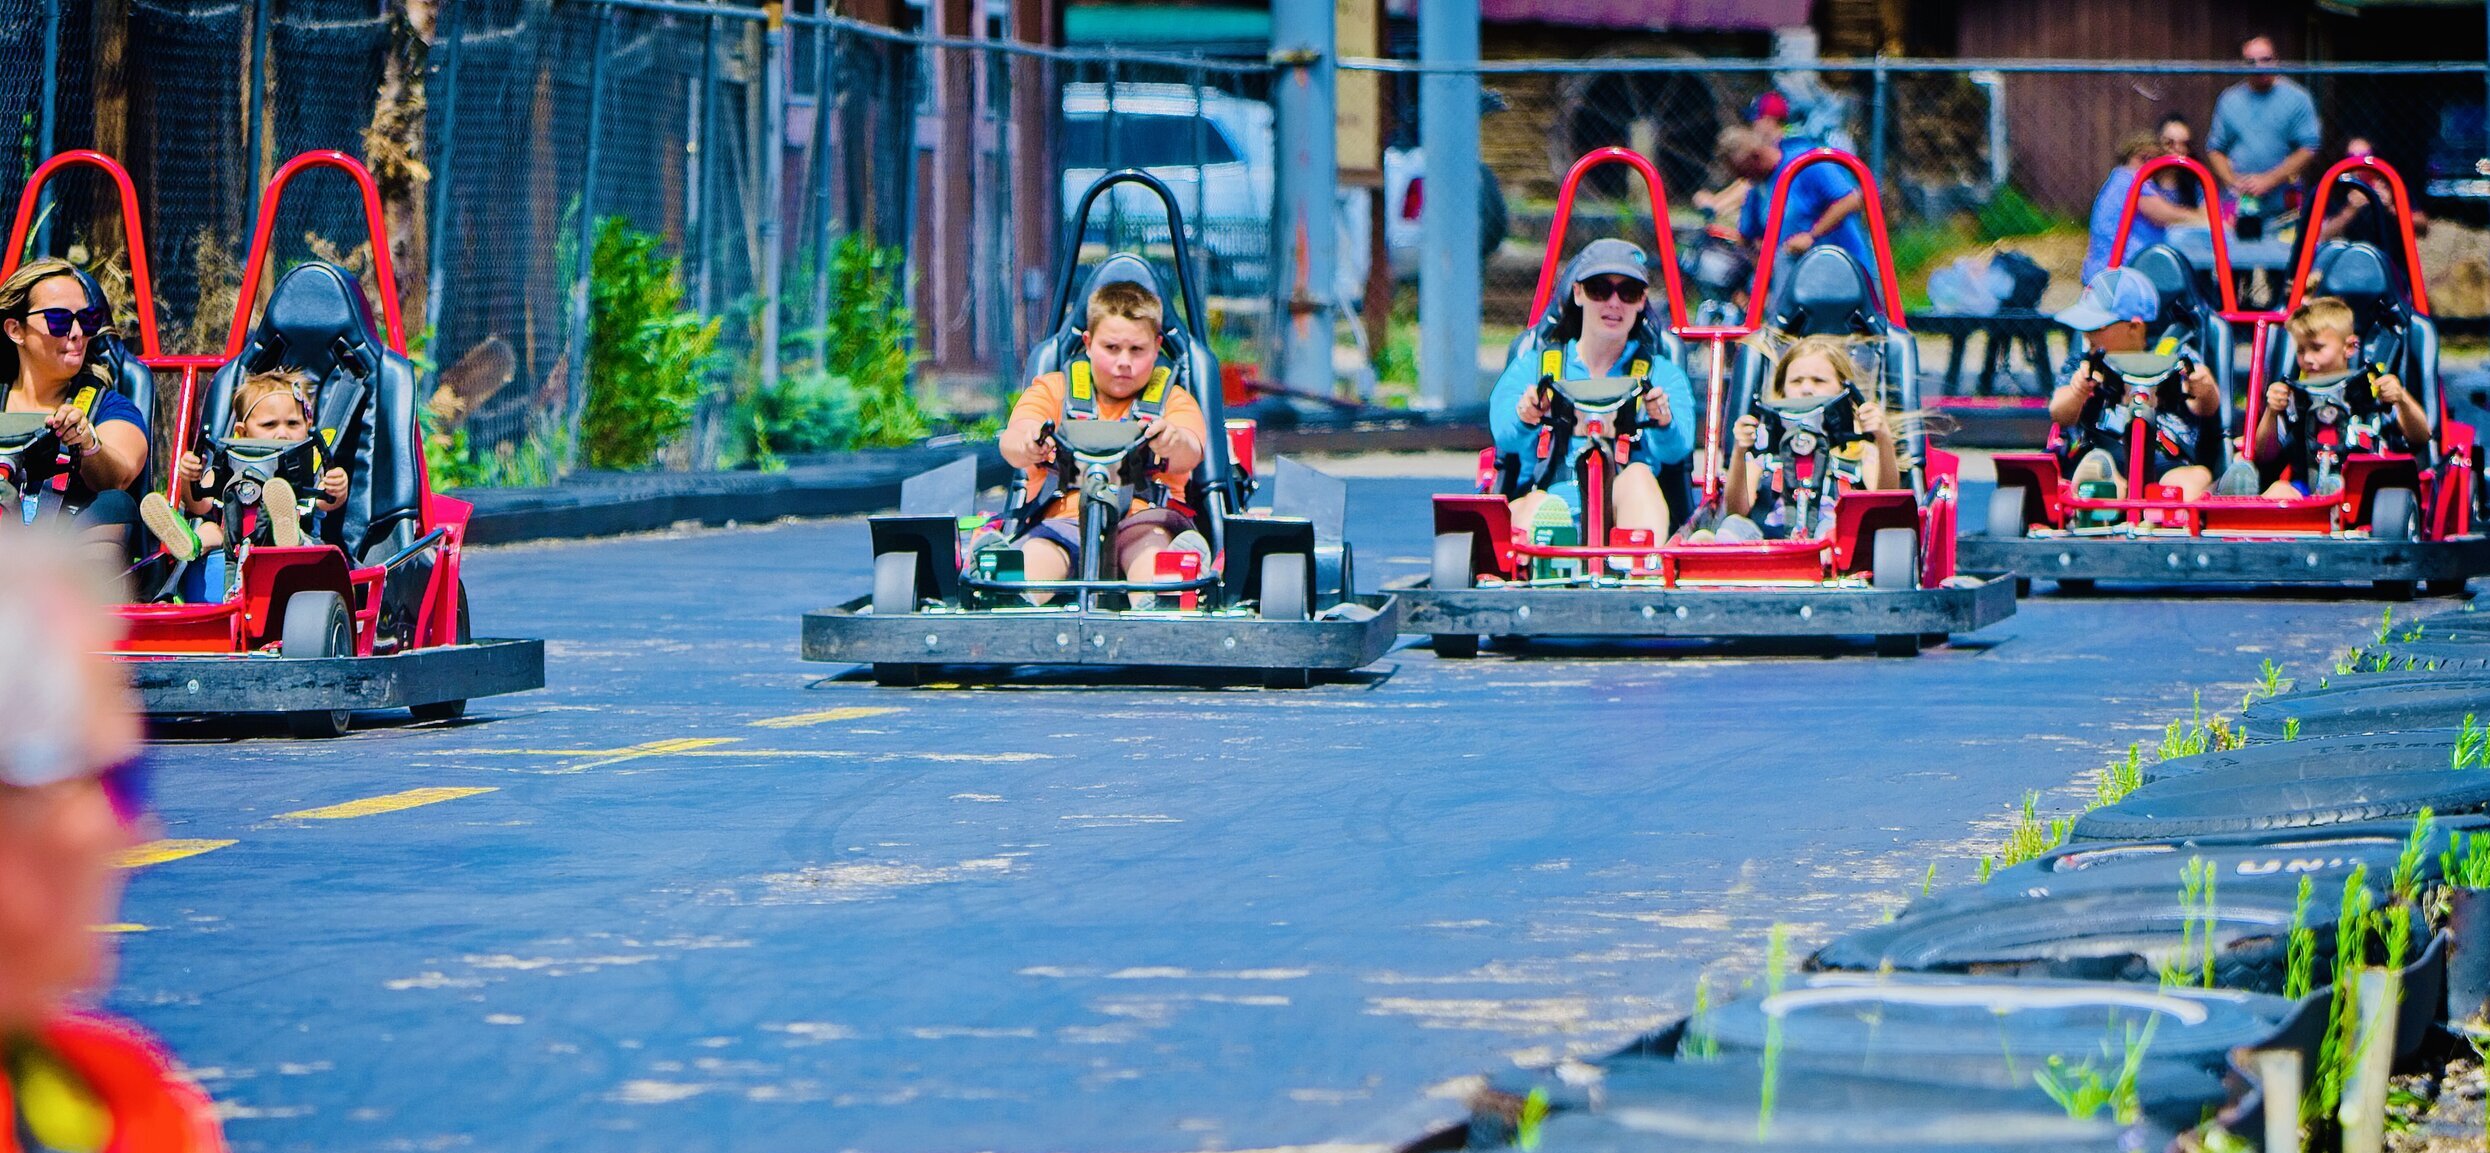 boy and people in go karts